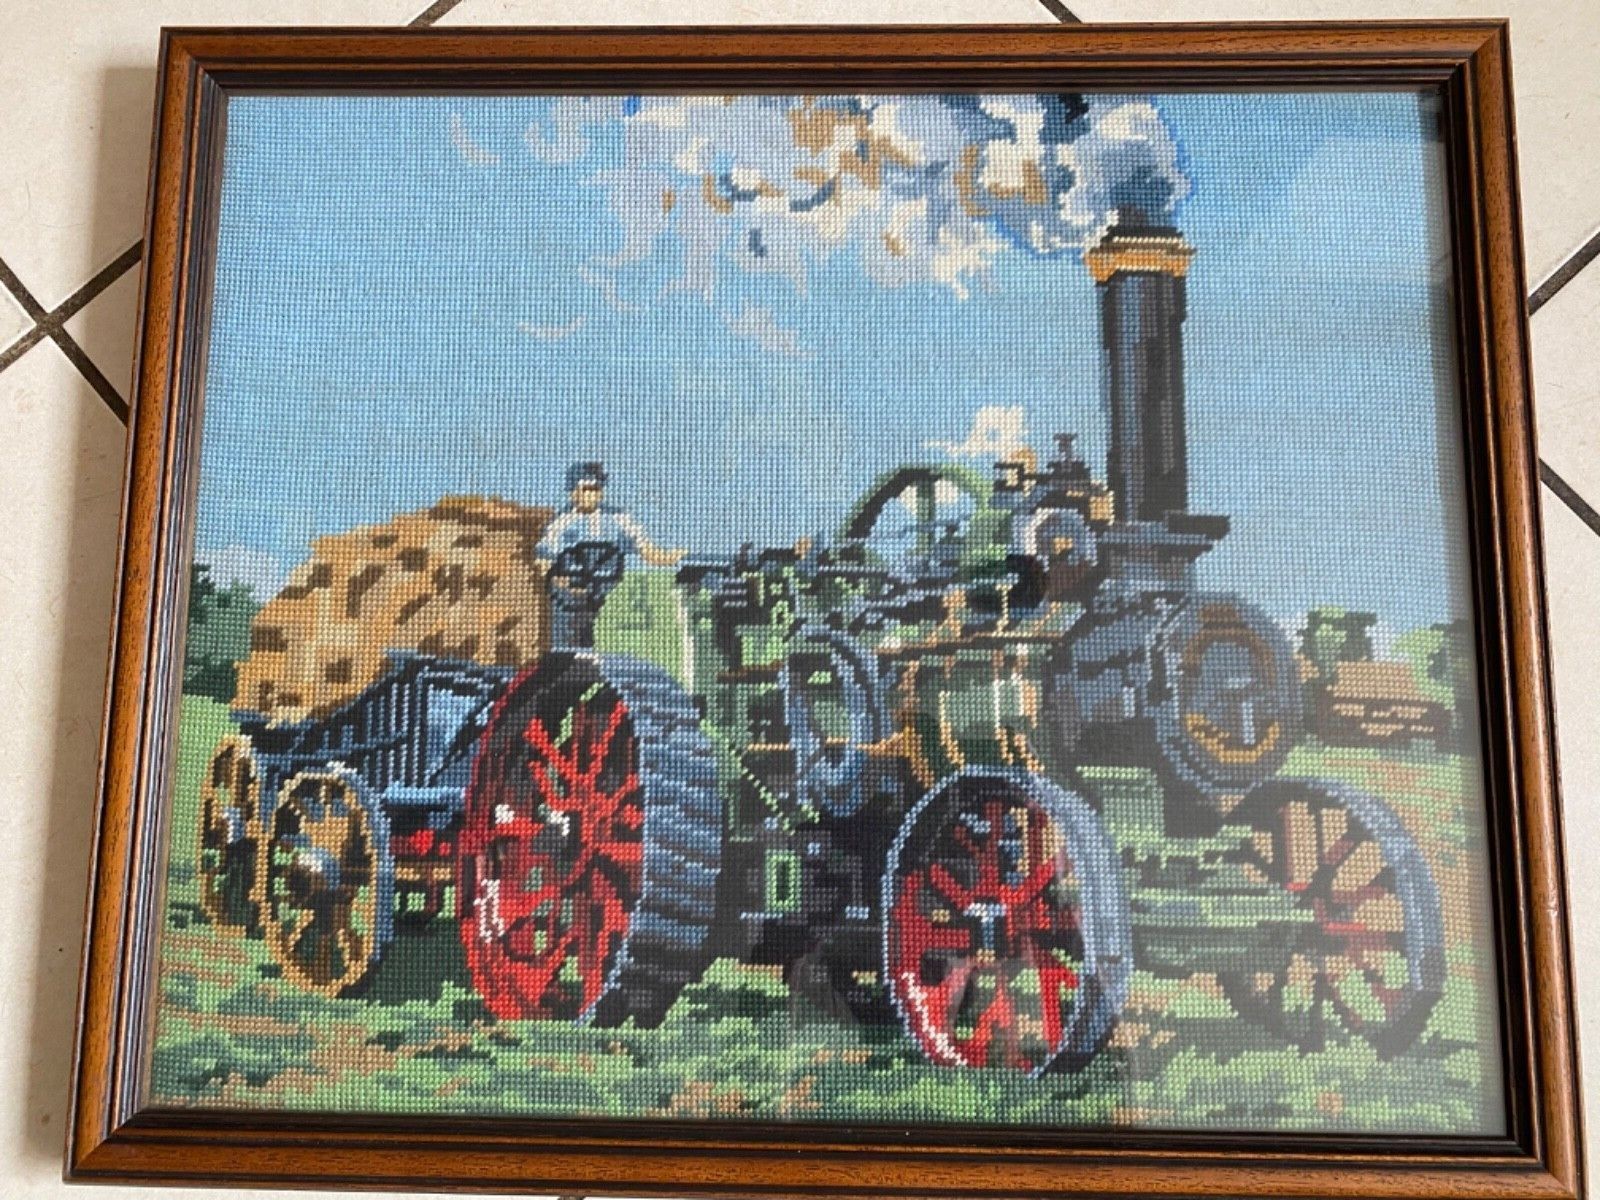 FRAMED TAPESTRY STEAM TRACTOR ENGINE 24 INCH BY 20 INCH OAK WOOD FRAMED RARE